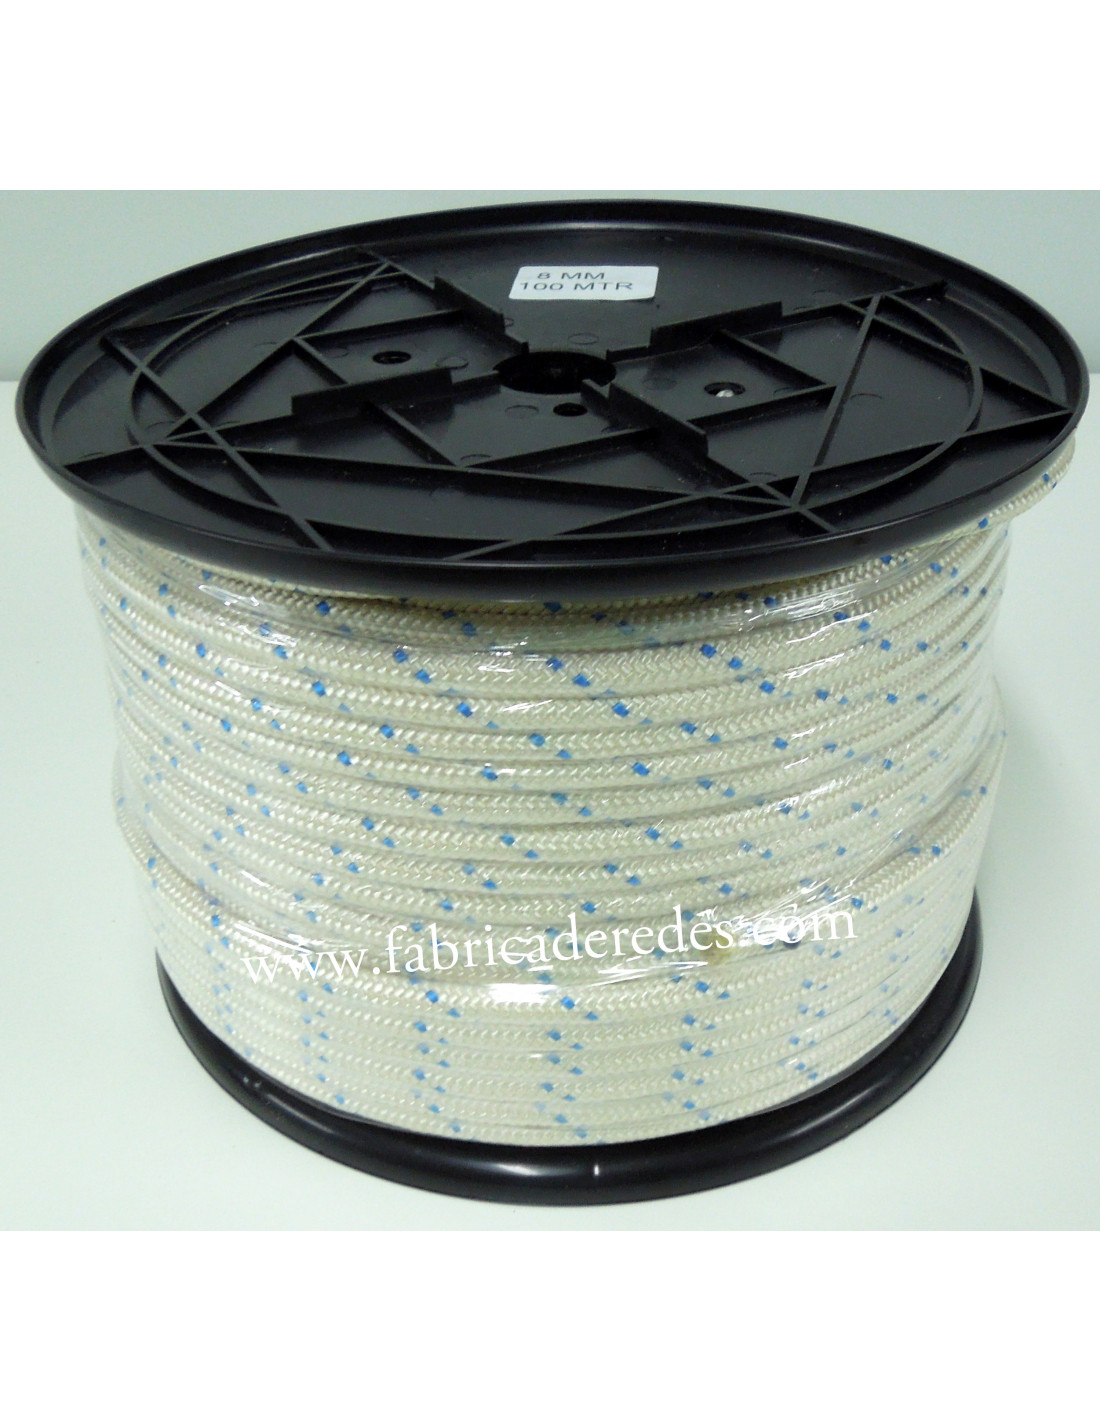 8mm rope in braided nylon with high tenacity web